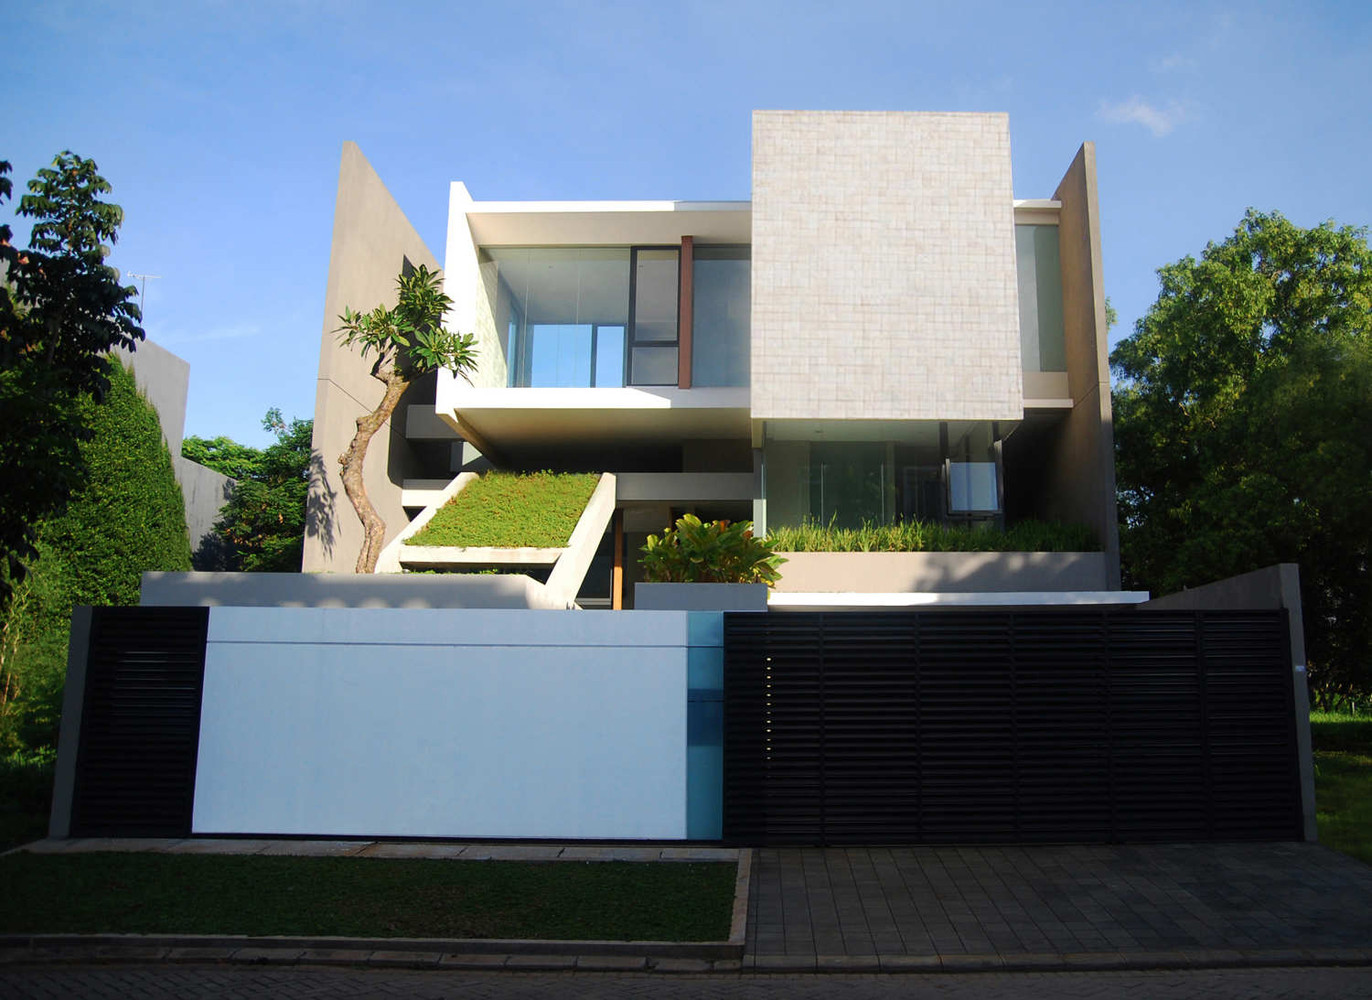 General 1372x1000 house architecture modern